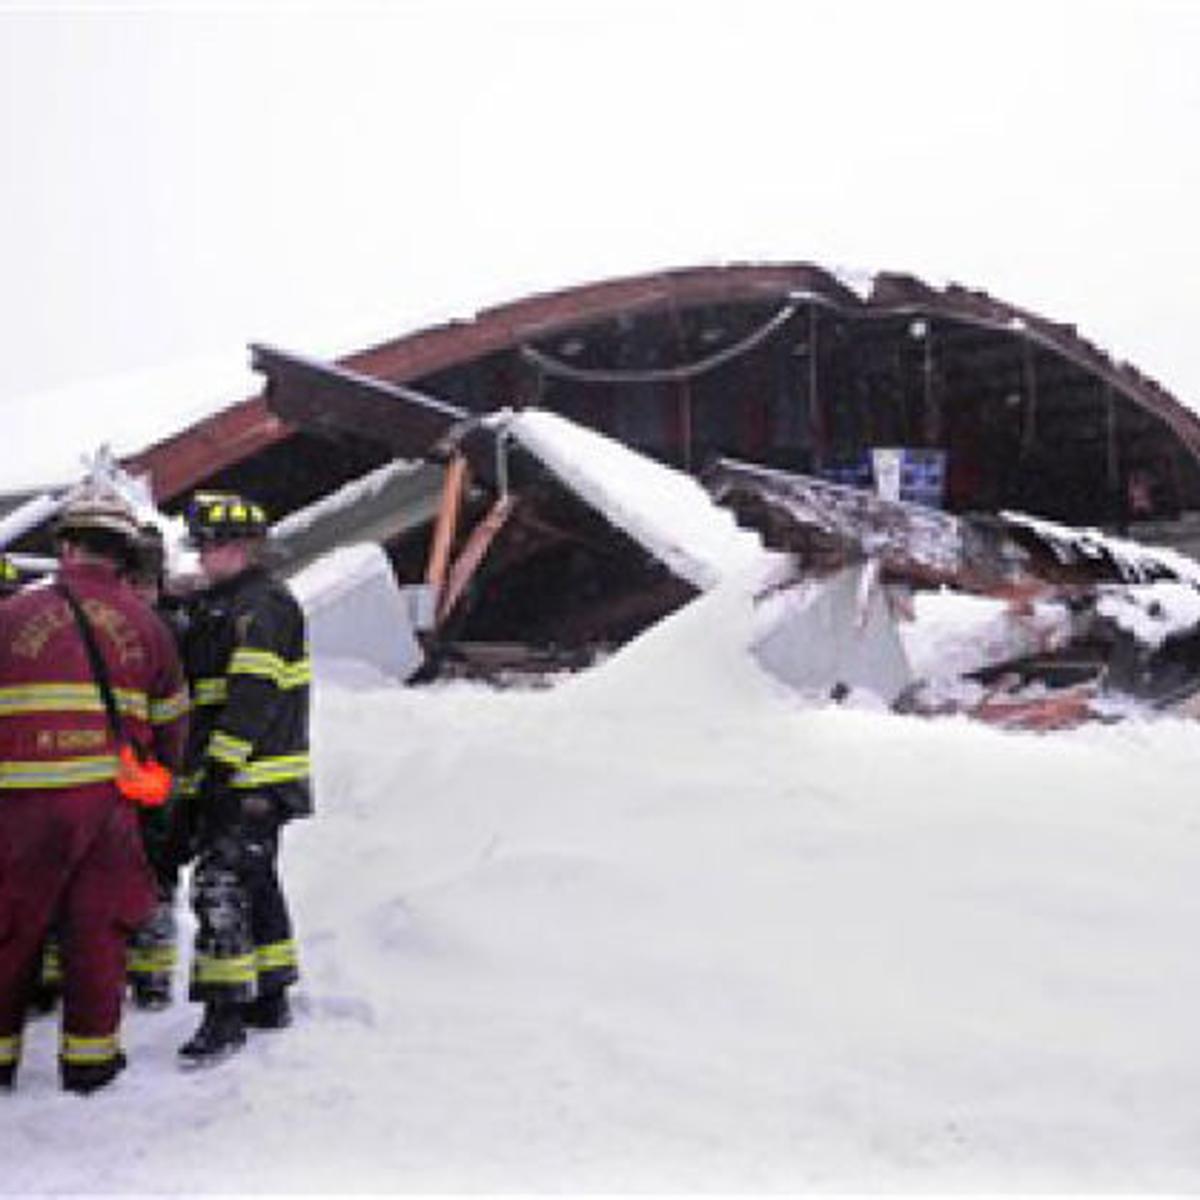 Snow Likely A Factor In Ice Rink Collapse News Dailyitem Com